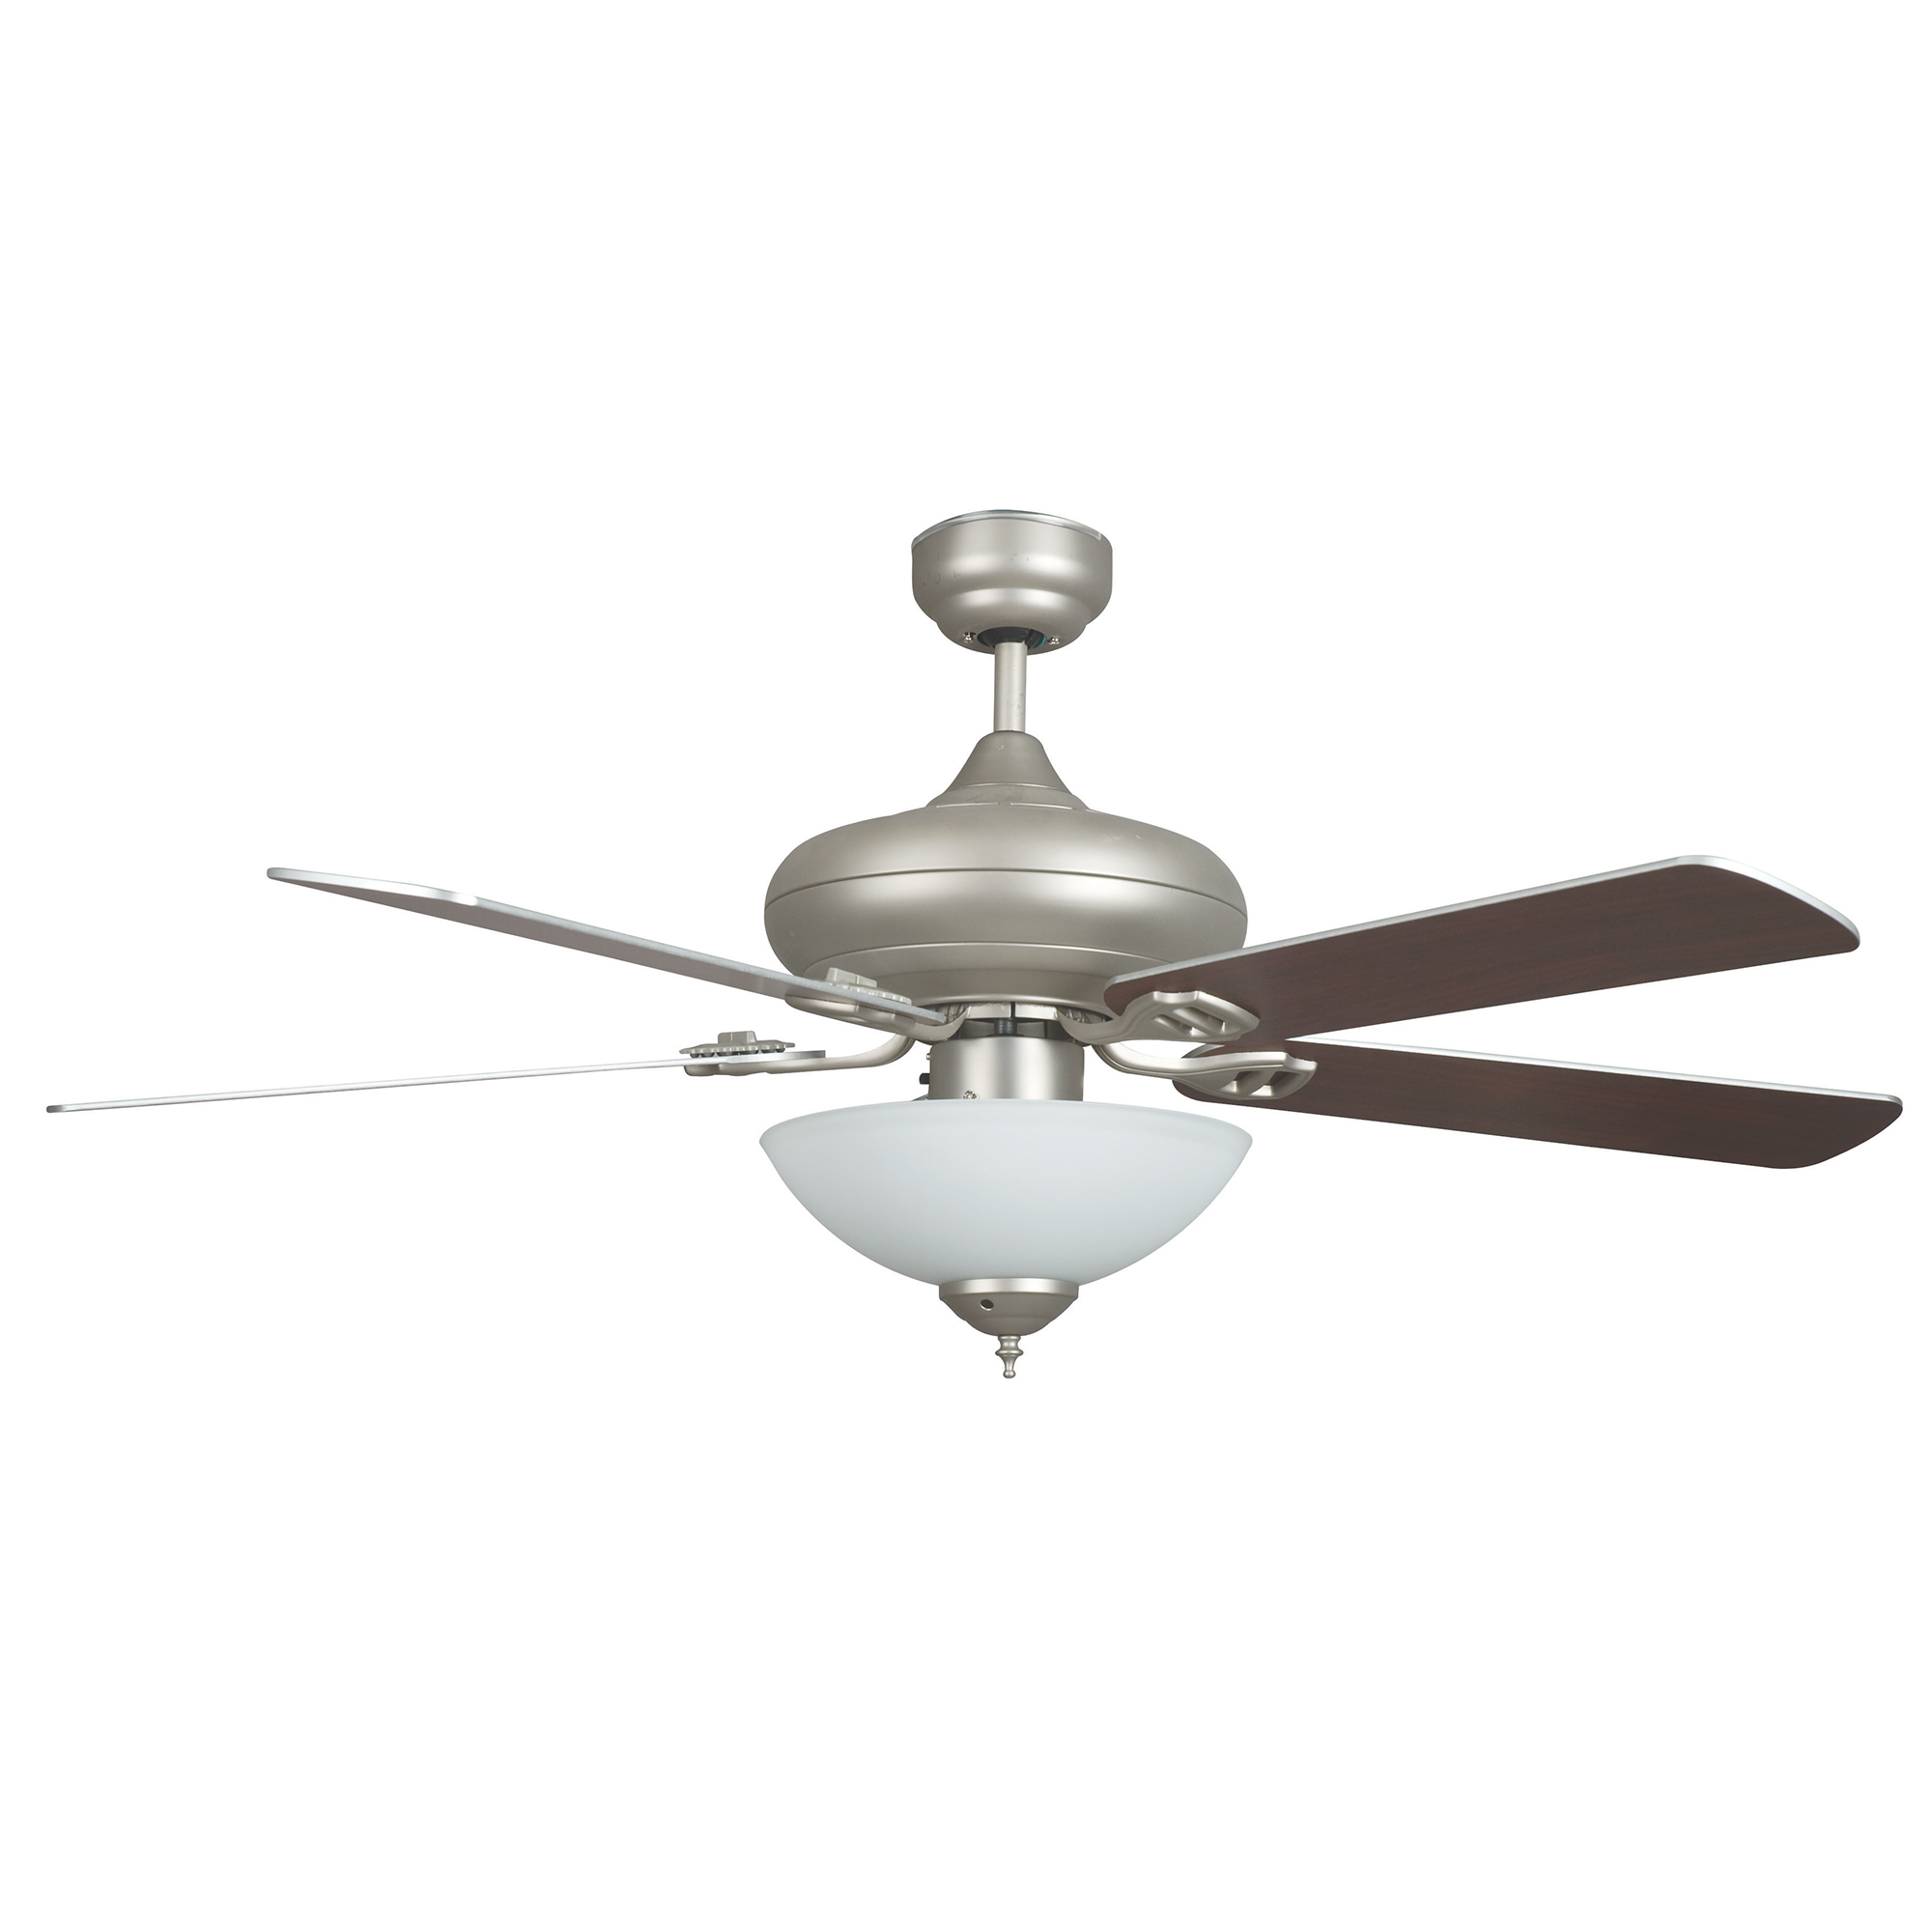 Concord Fans 52 Inch Valore, Three Light Quick Connect Fan with Satin Nickel Finish